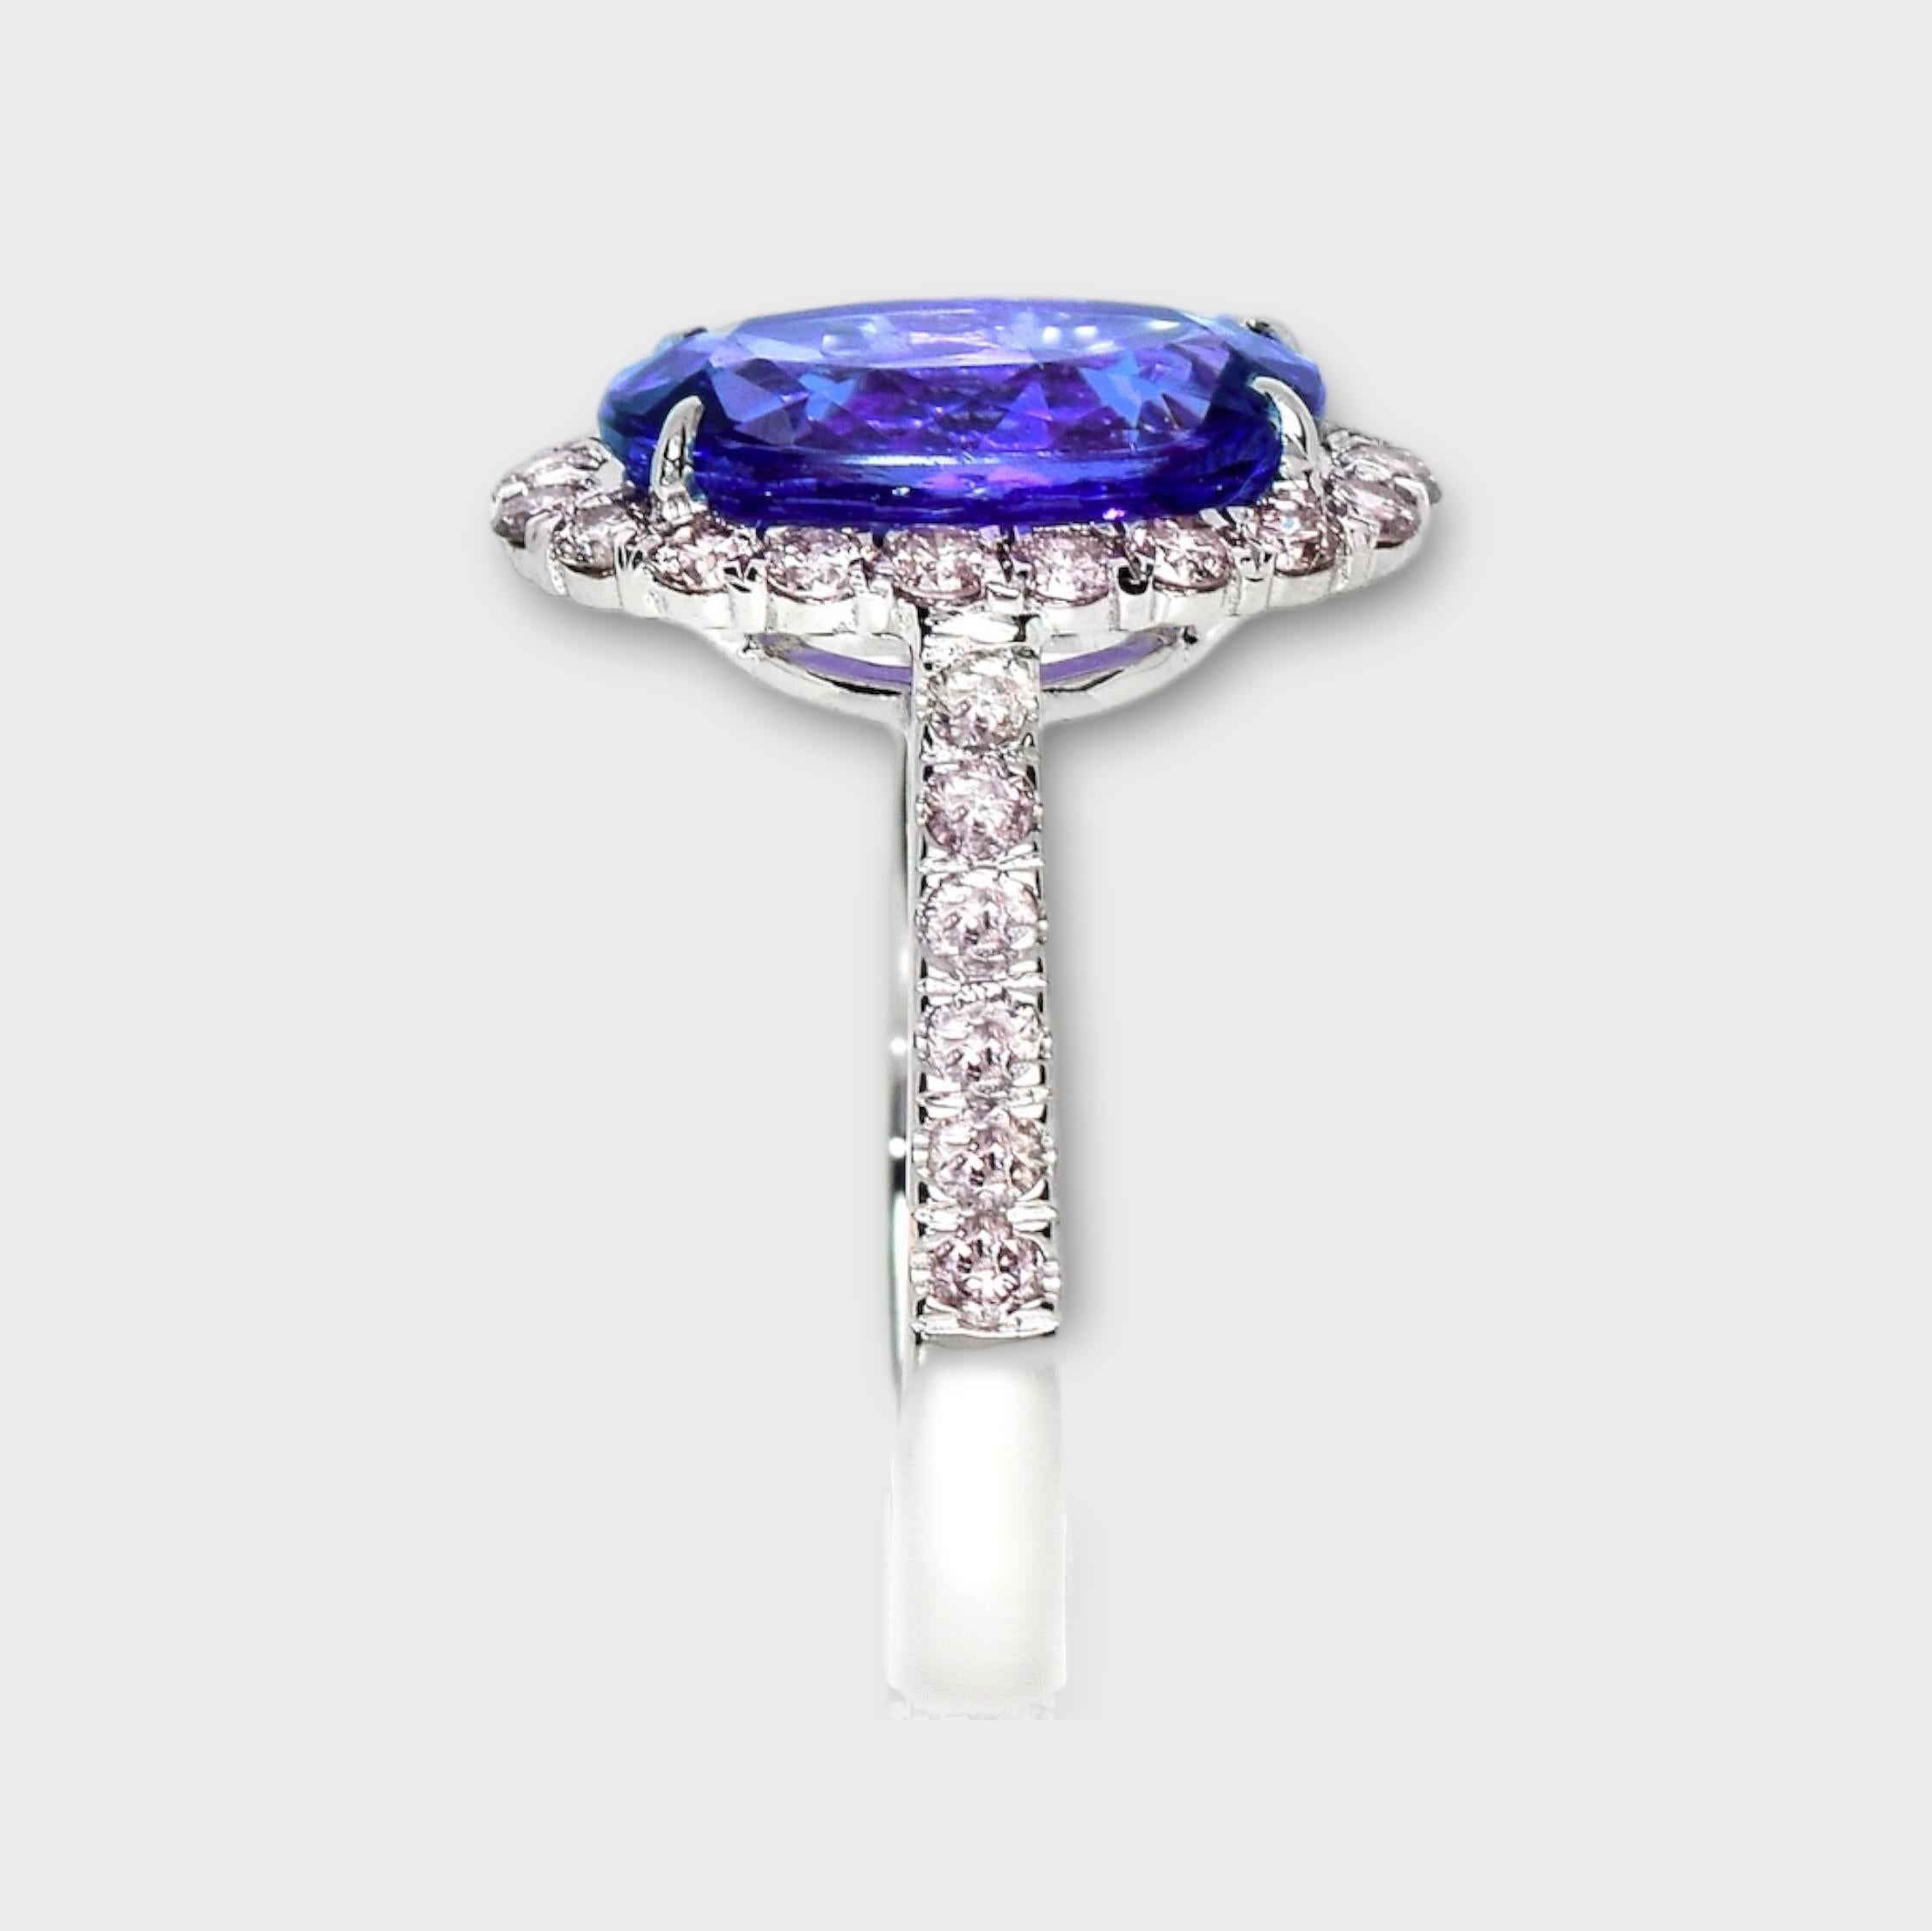 IGI 14K 2.56 ct Tanzanite&Pink Diamond Antique Art Deco Engagement Ring In New Condition For Sale In Kaohsiung City, TW